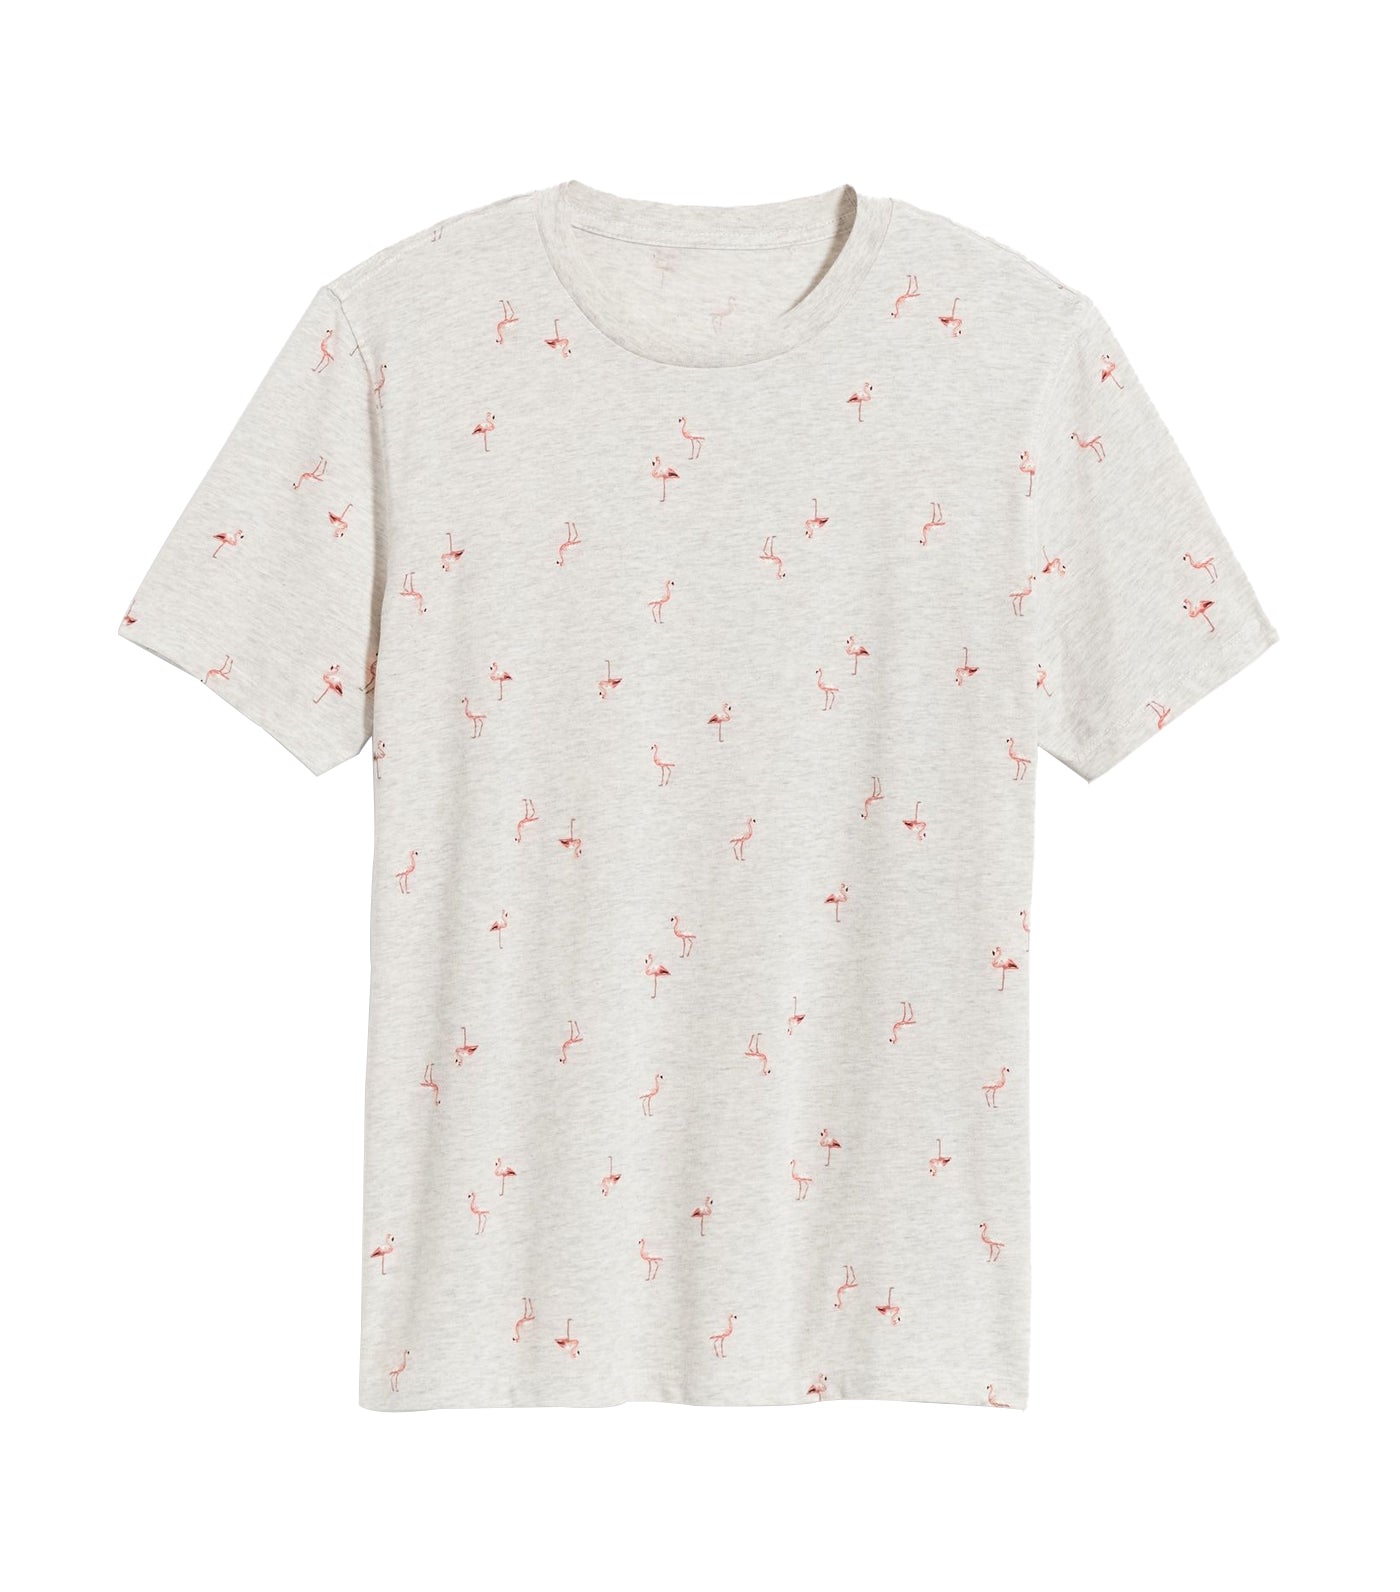 Soft-Washed Printed Crew-Neck T-Shirt for Men Flamingo